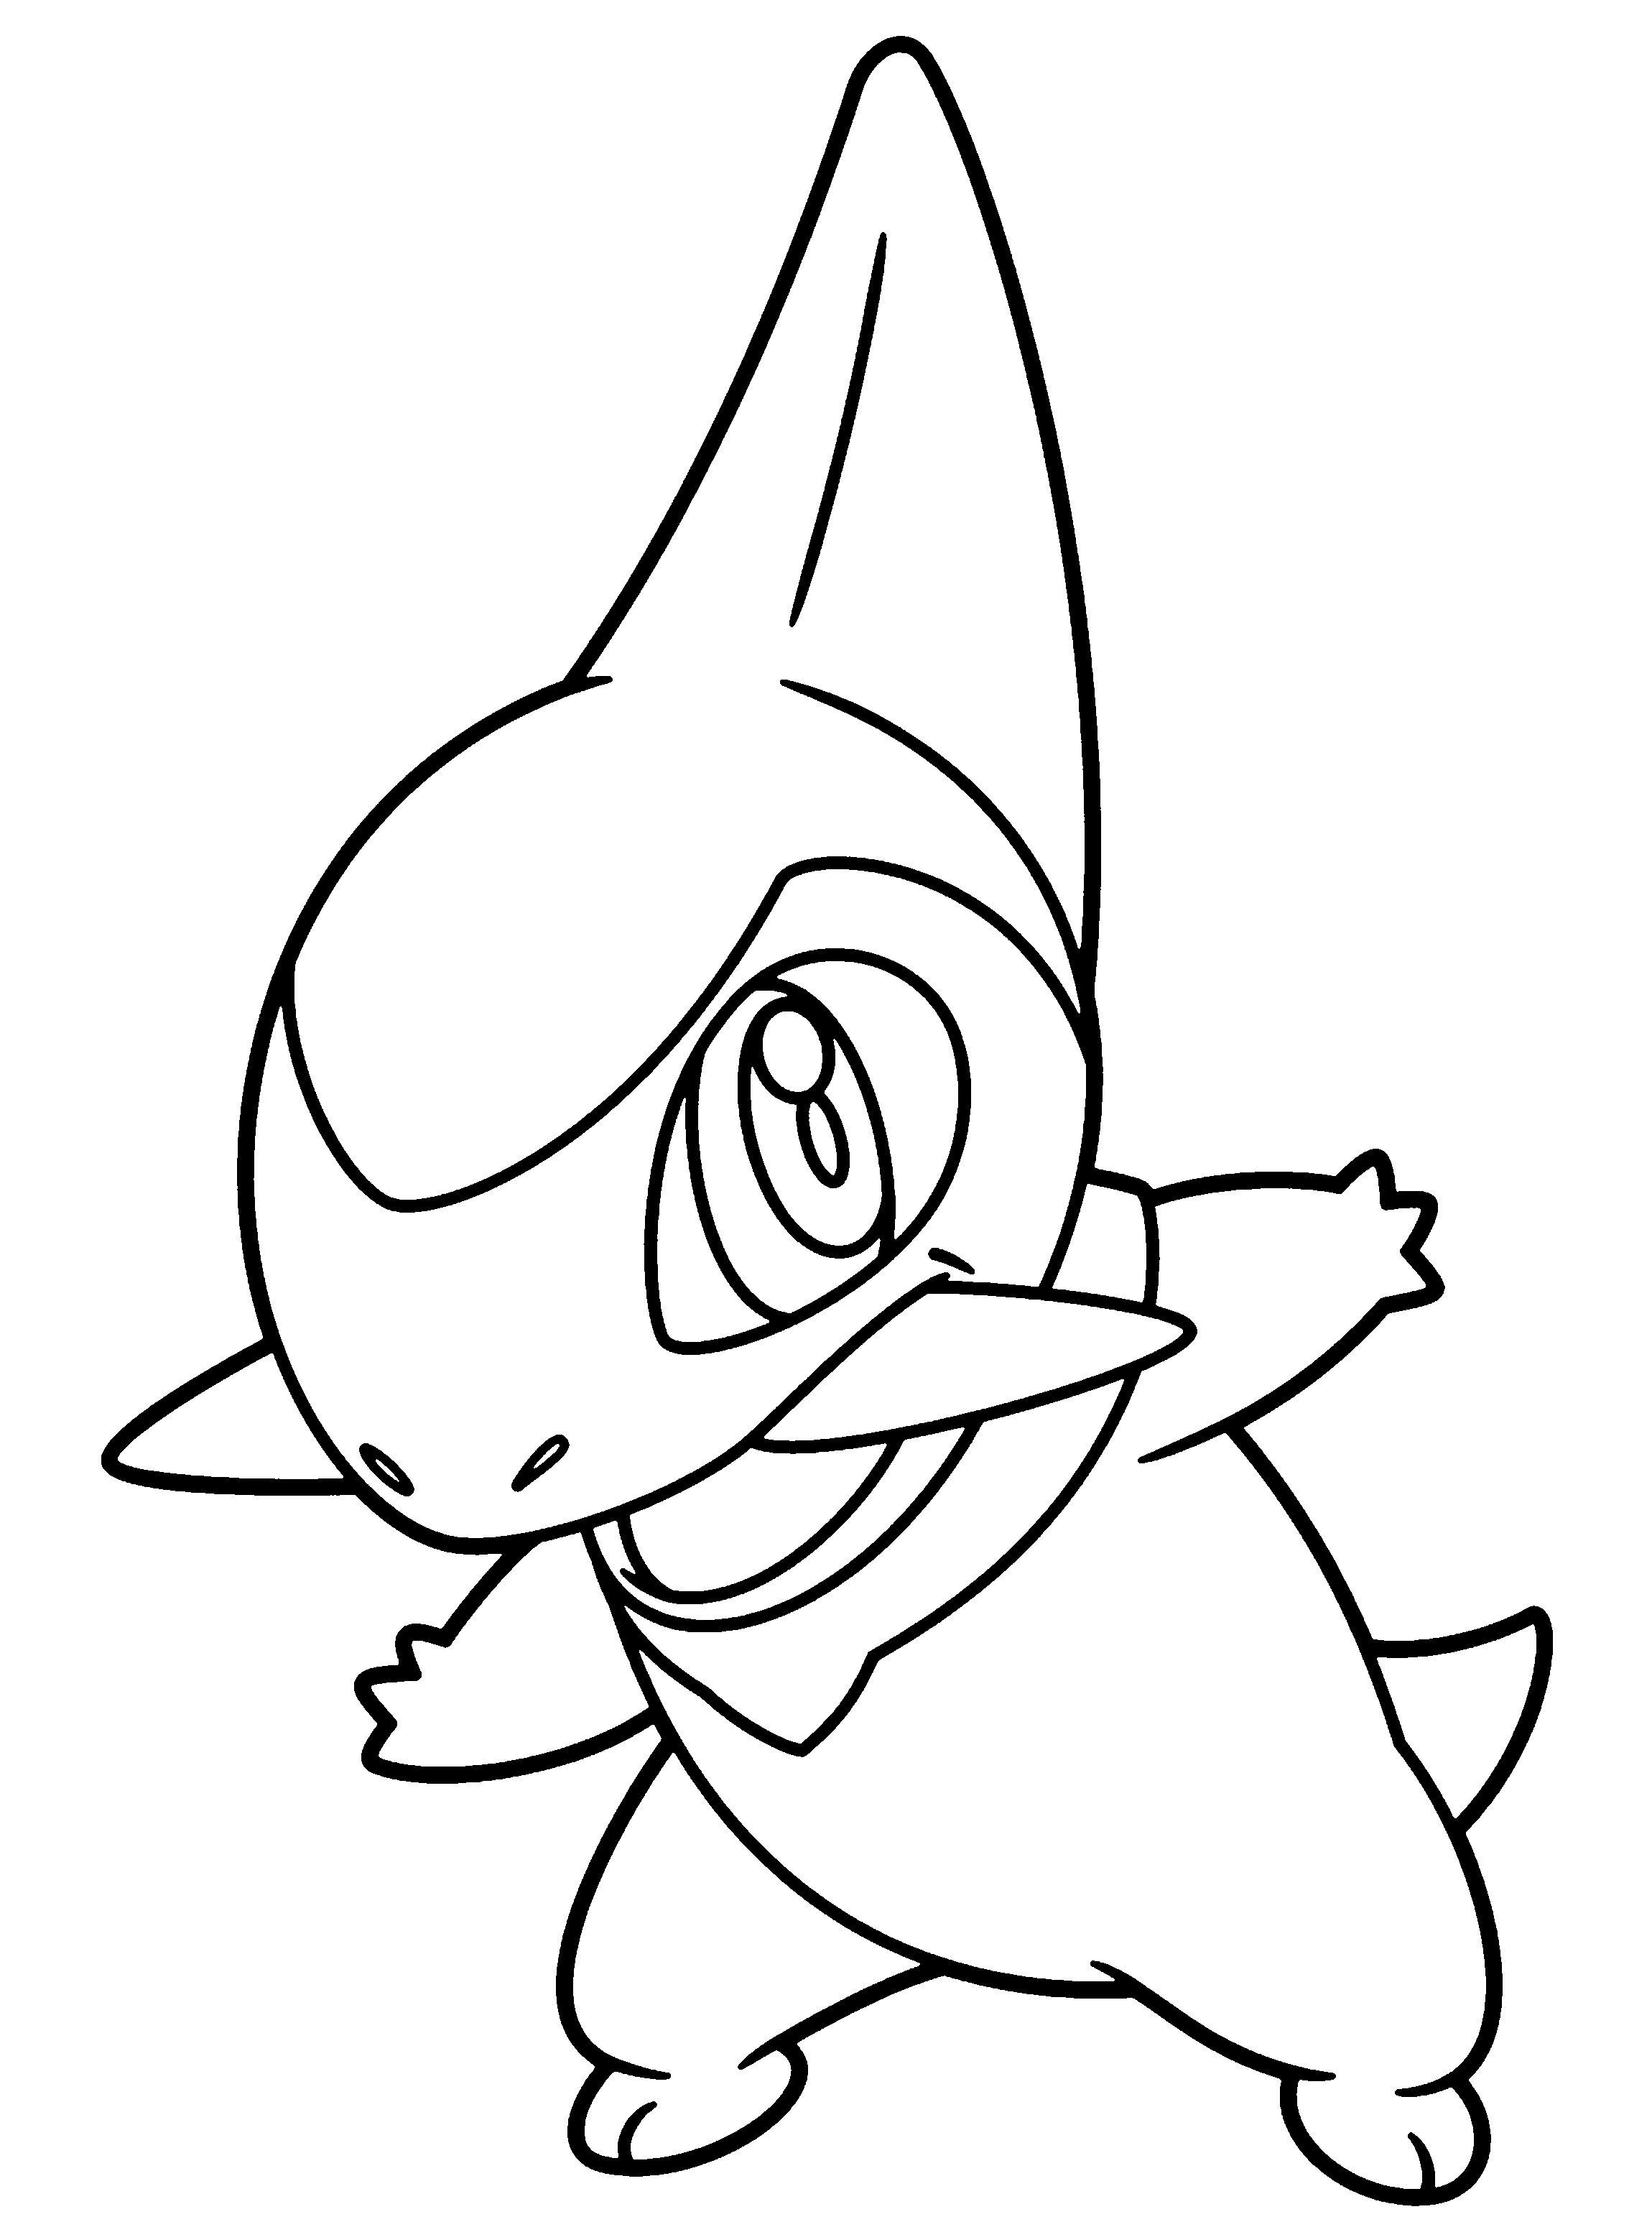 Axew Pokemon coloring page